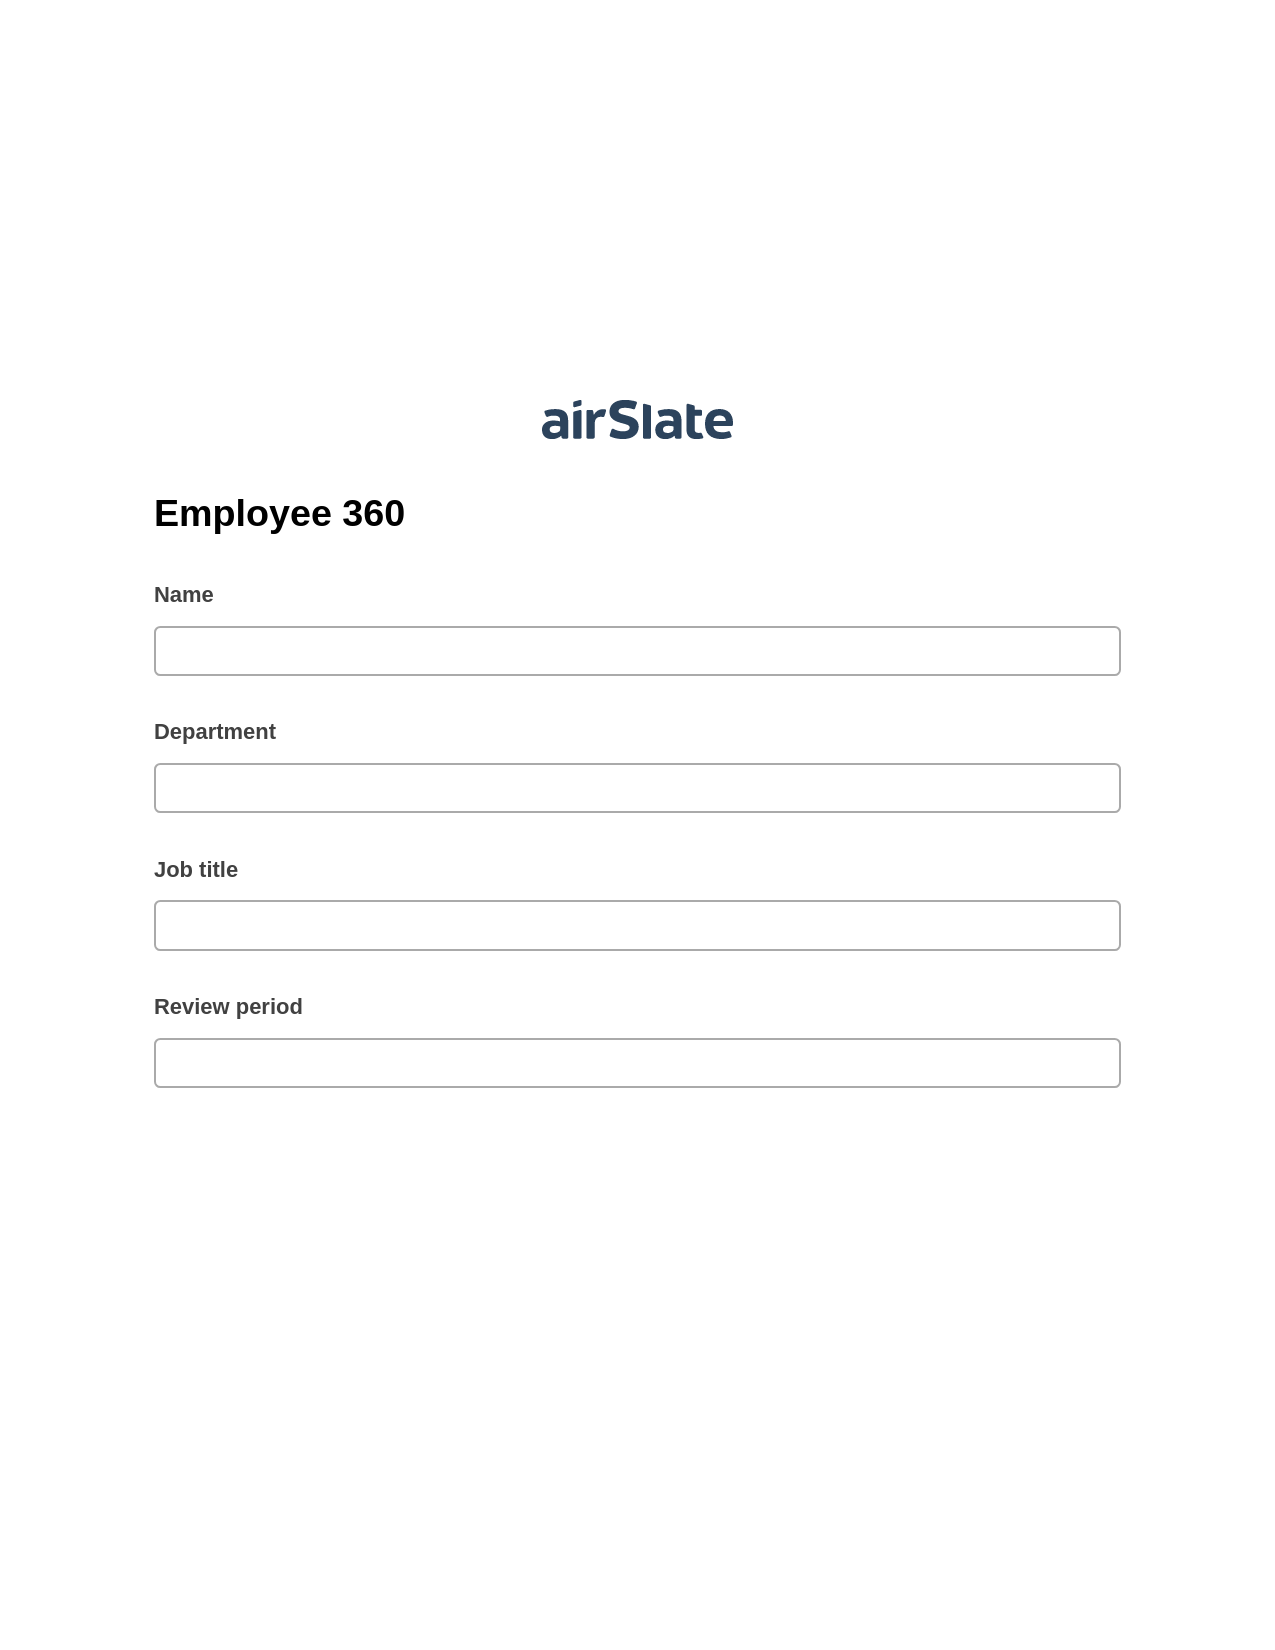 Employee 360 Pre-fill from another Slate Bot, Update MS Dynamics 365 Record Bot, Text Message Notification Postfinish Bot